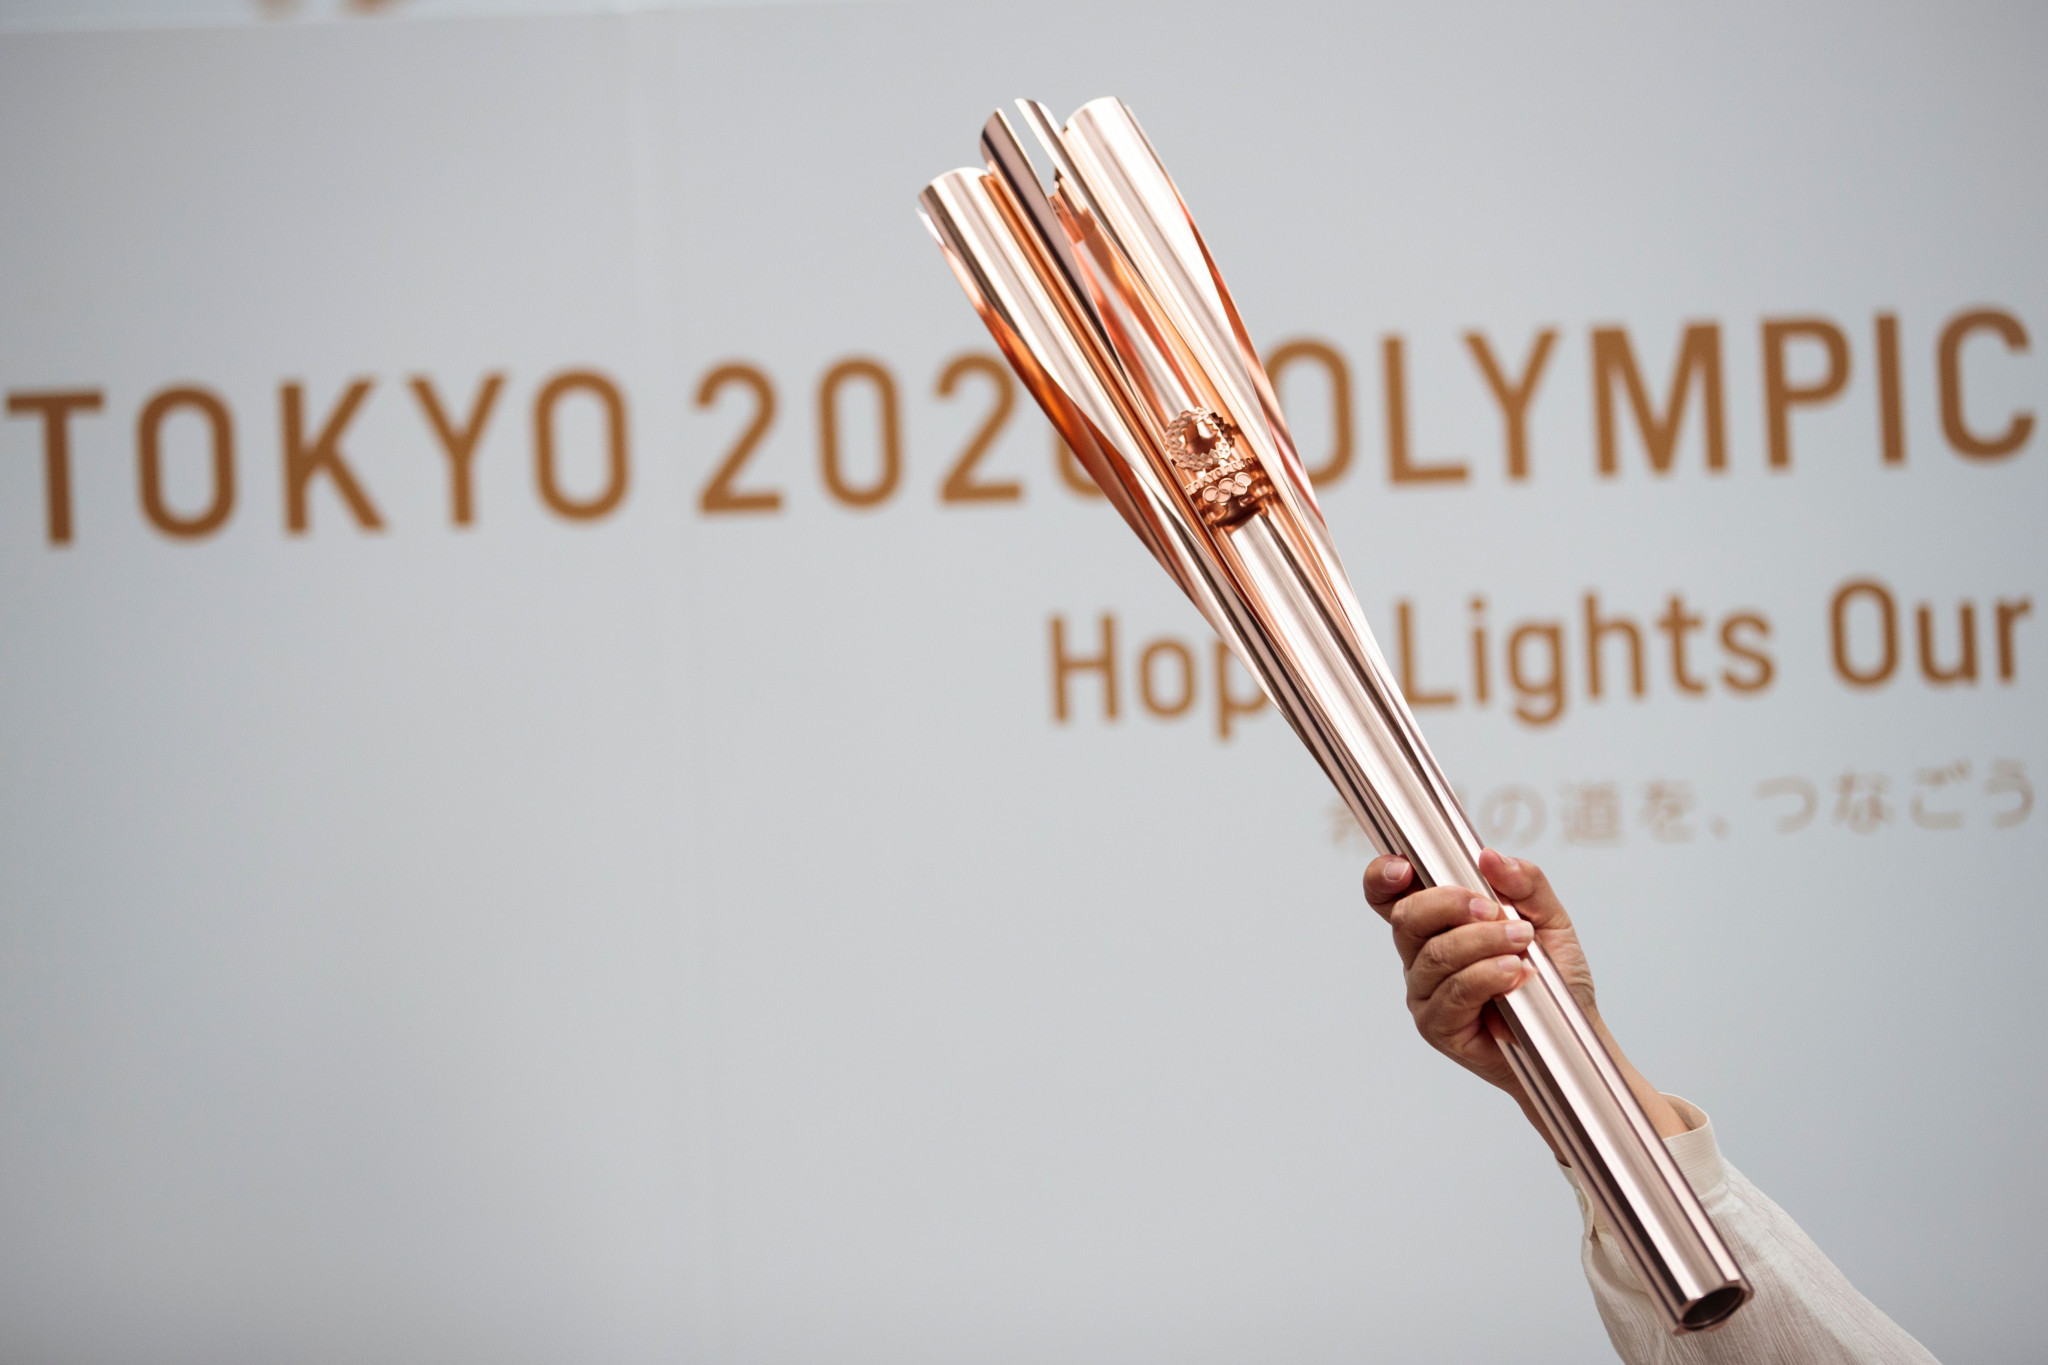 Tokyo 2020 organisers have announced that 535,717 applications have been made from members of the public hoping to carry the Olympic flame in the Torch Relay ©Getty Images